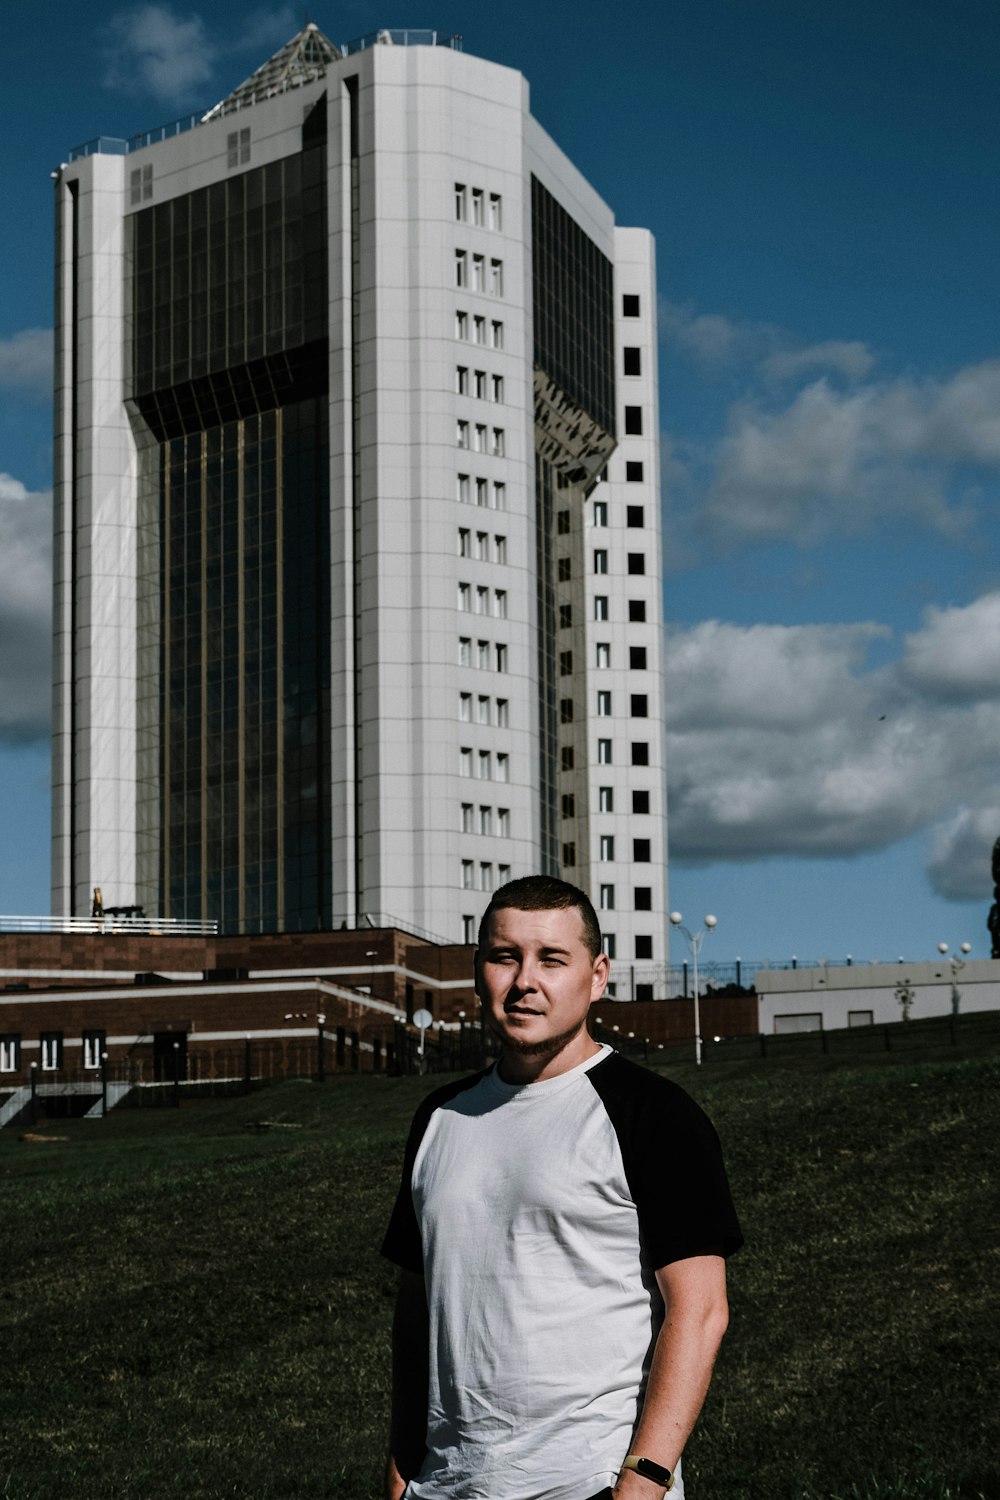 man in black jacket standing on green grass field near high rise building during daytime